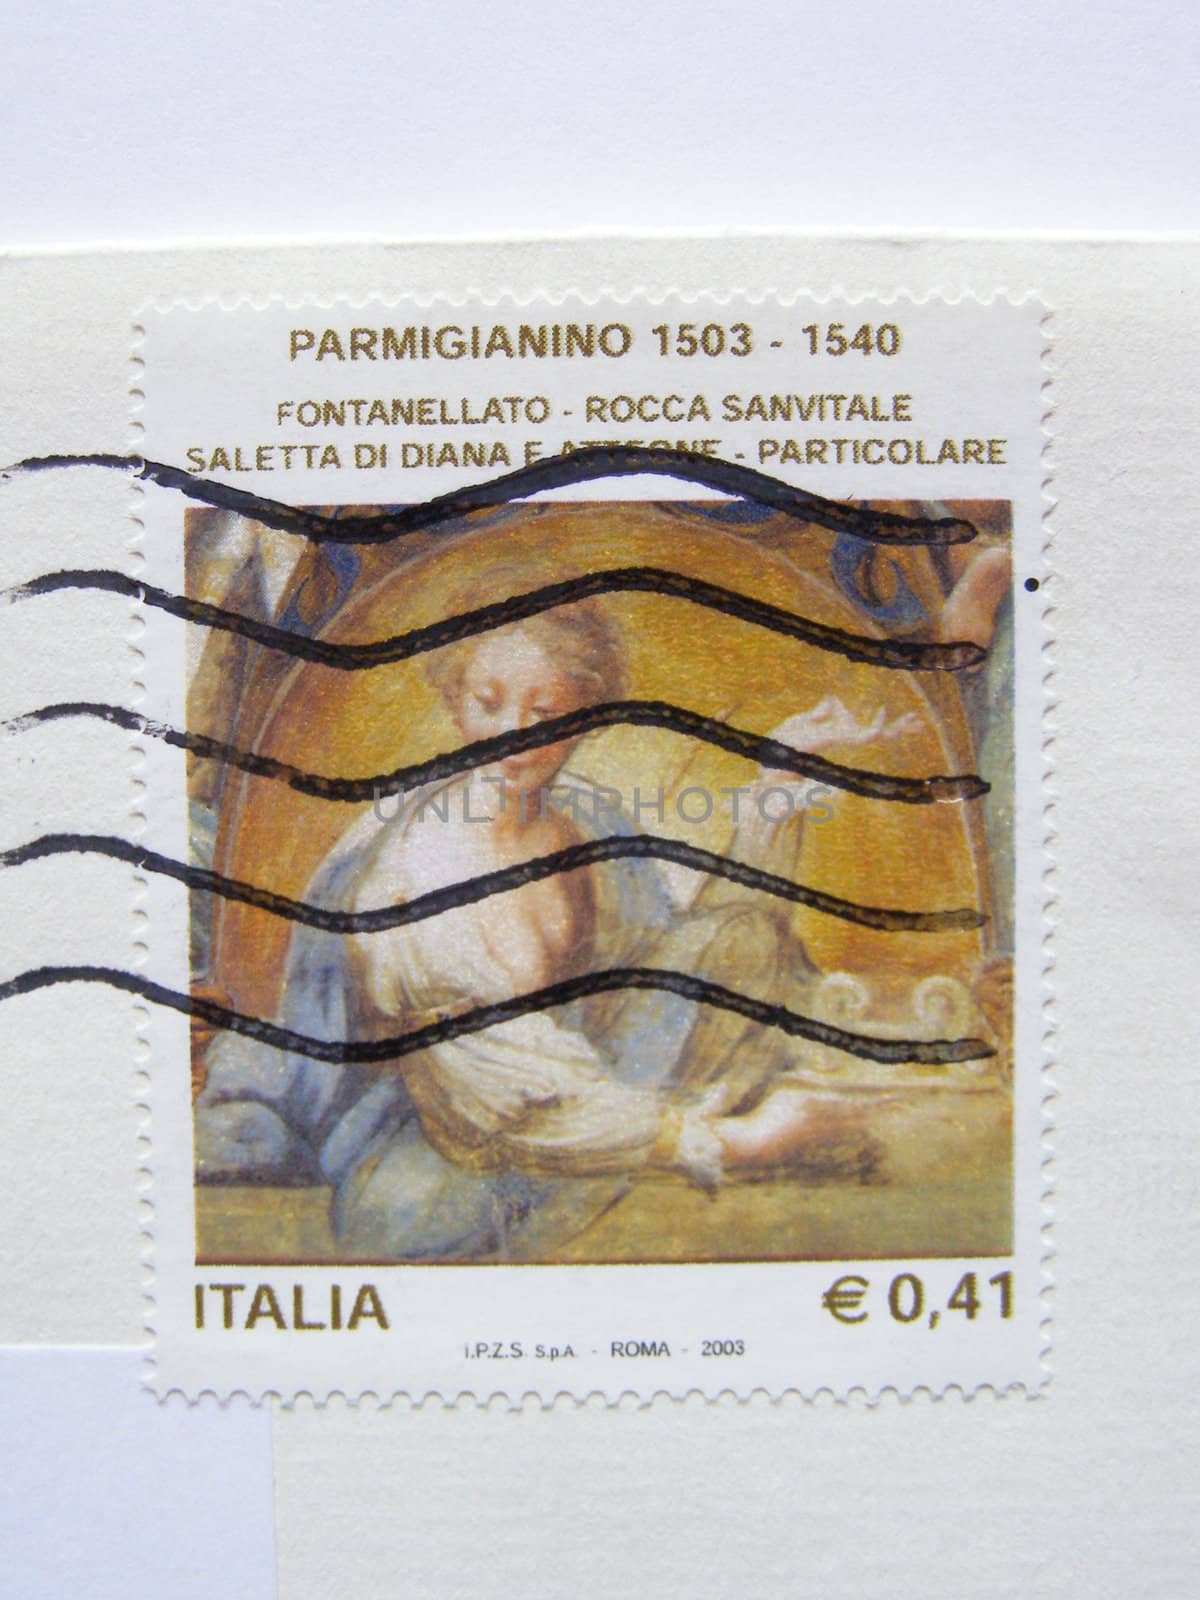 mail stamp from Italy with Parmigianino painting on it